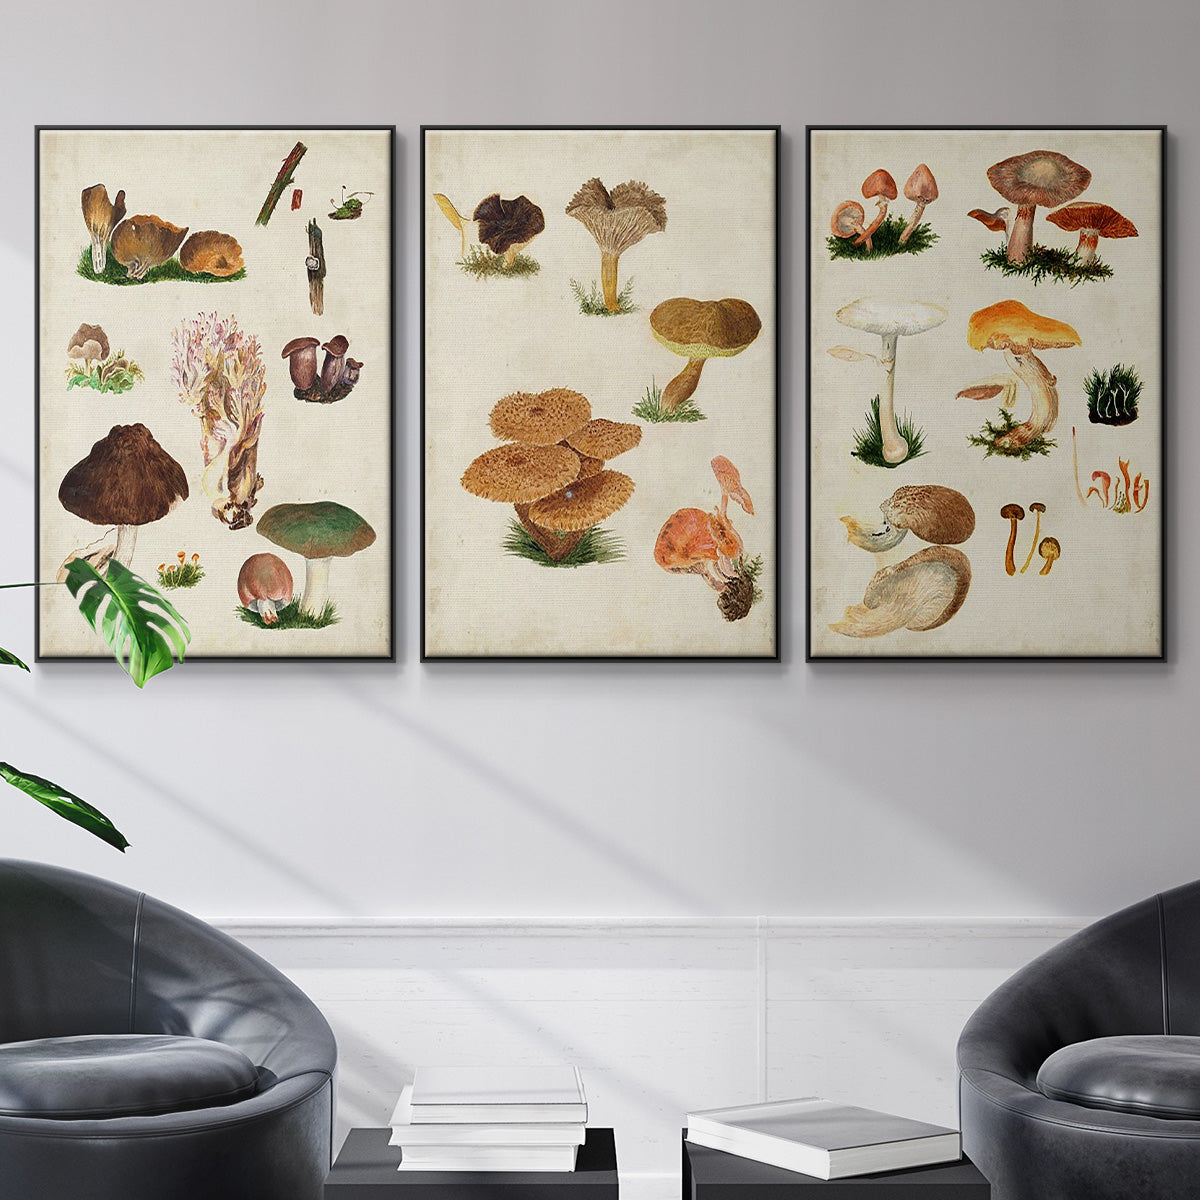 Mushroom Species I - Framed Premium Gallery Wrapped Canvas L Frame 3 Piece Set - Ready to Hang